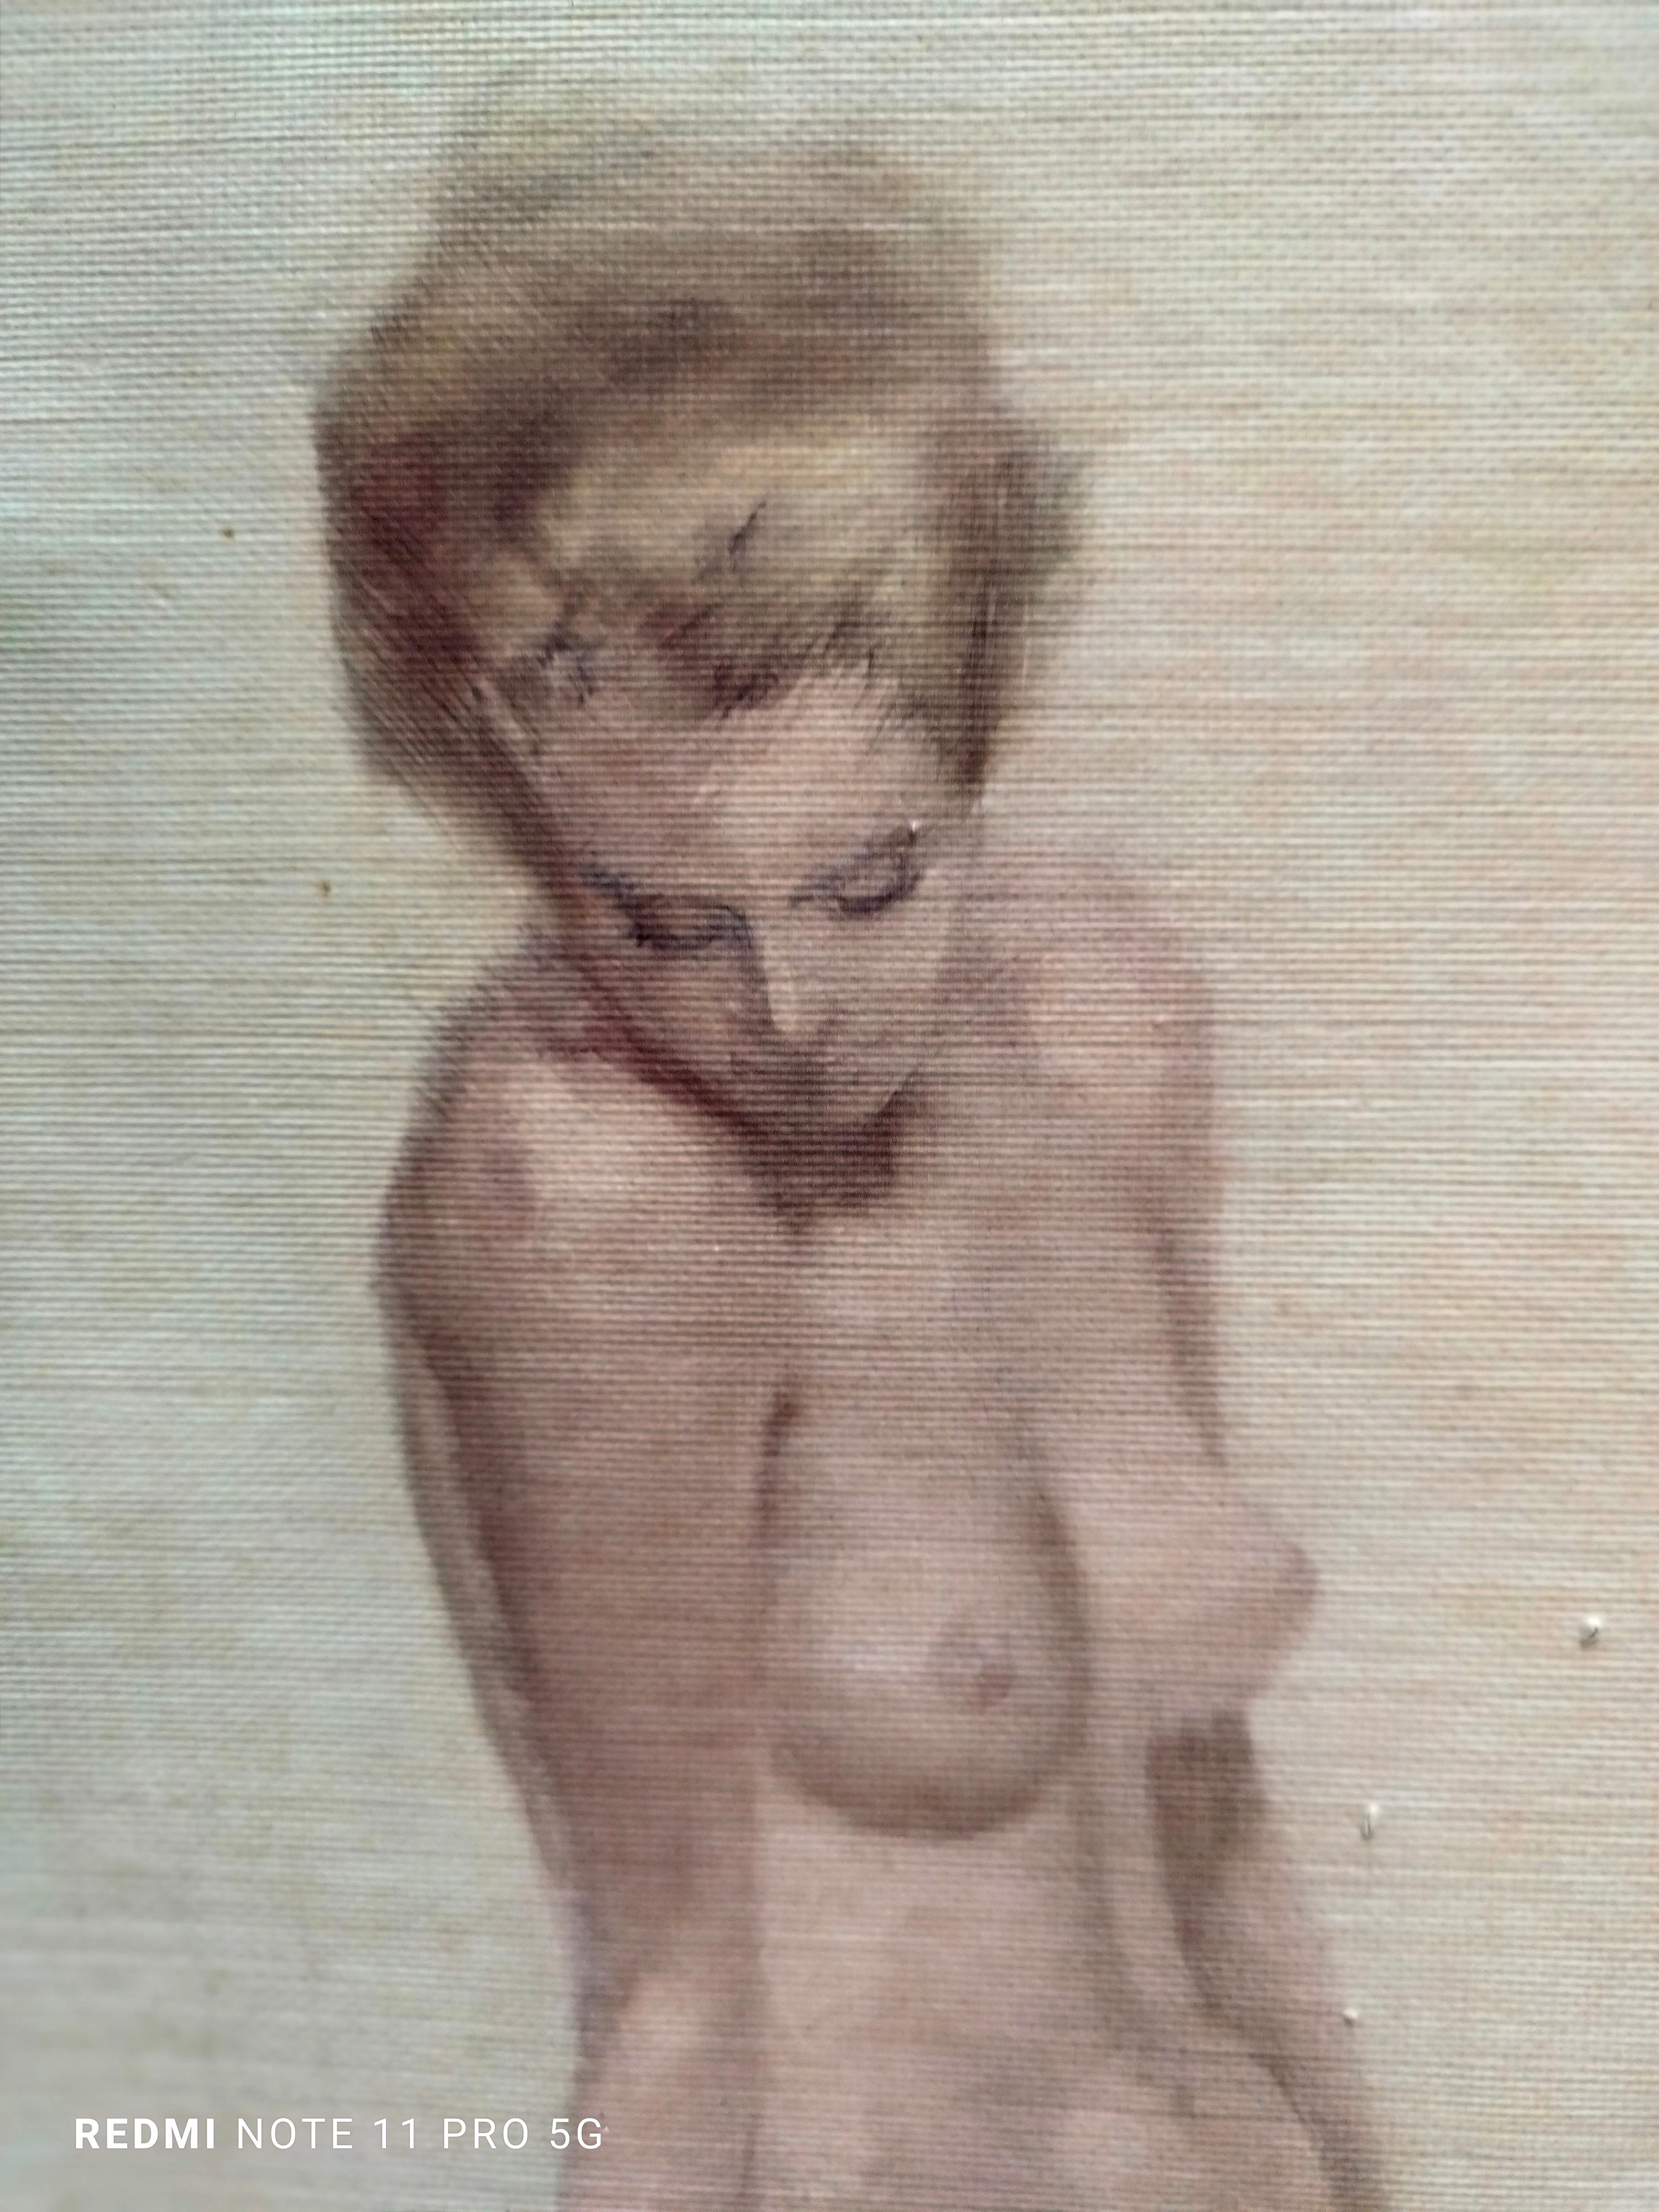 NUDO OF WOMAN - giclee print on canvas - Modern Print by Marcello Cassinari Vettor